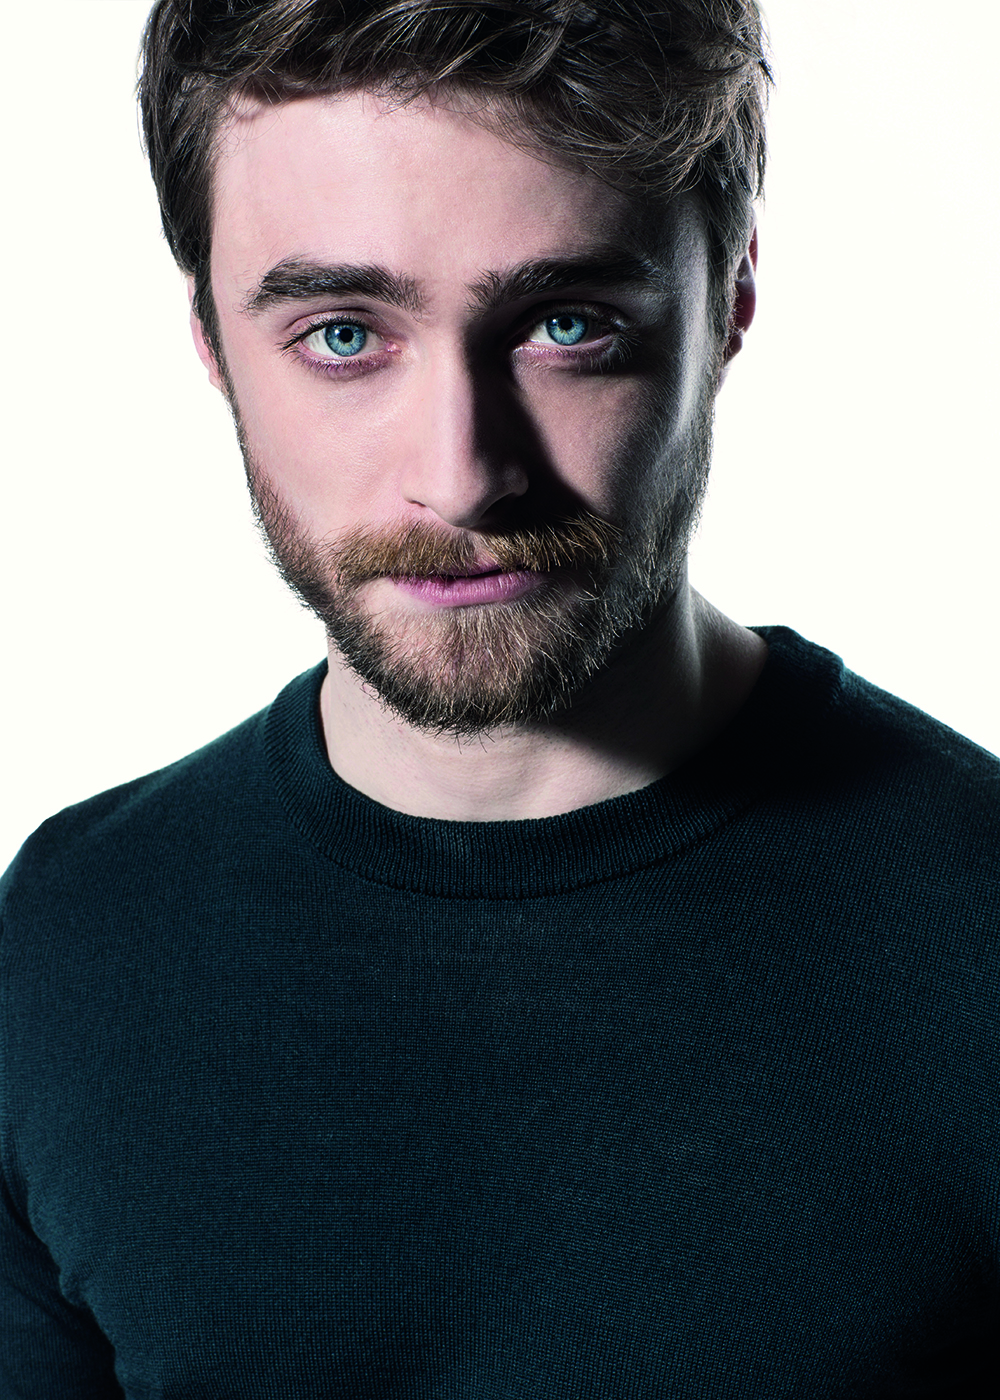 Who’s the real Daniel Radcliffe?